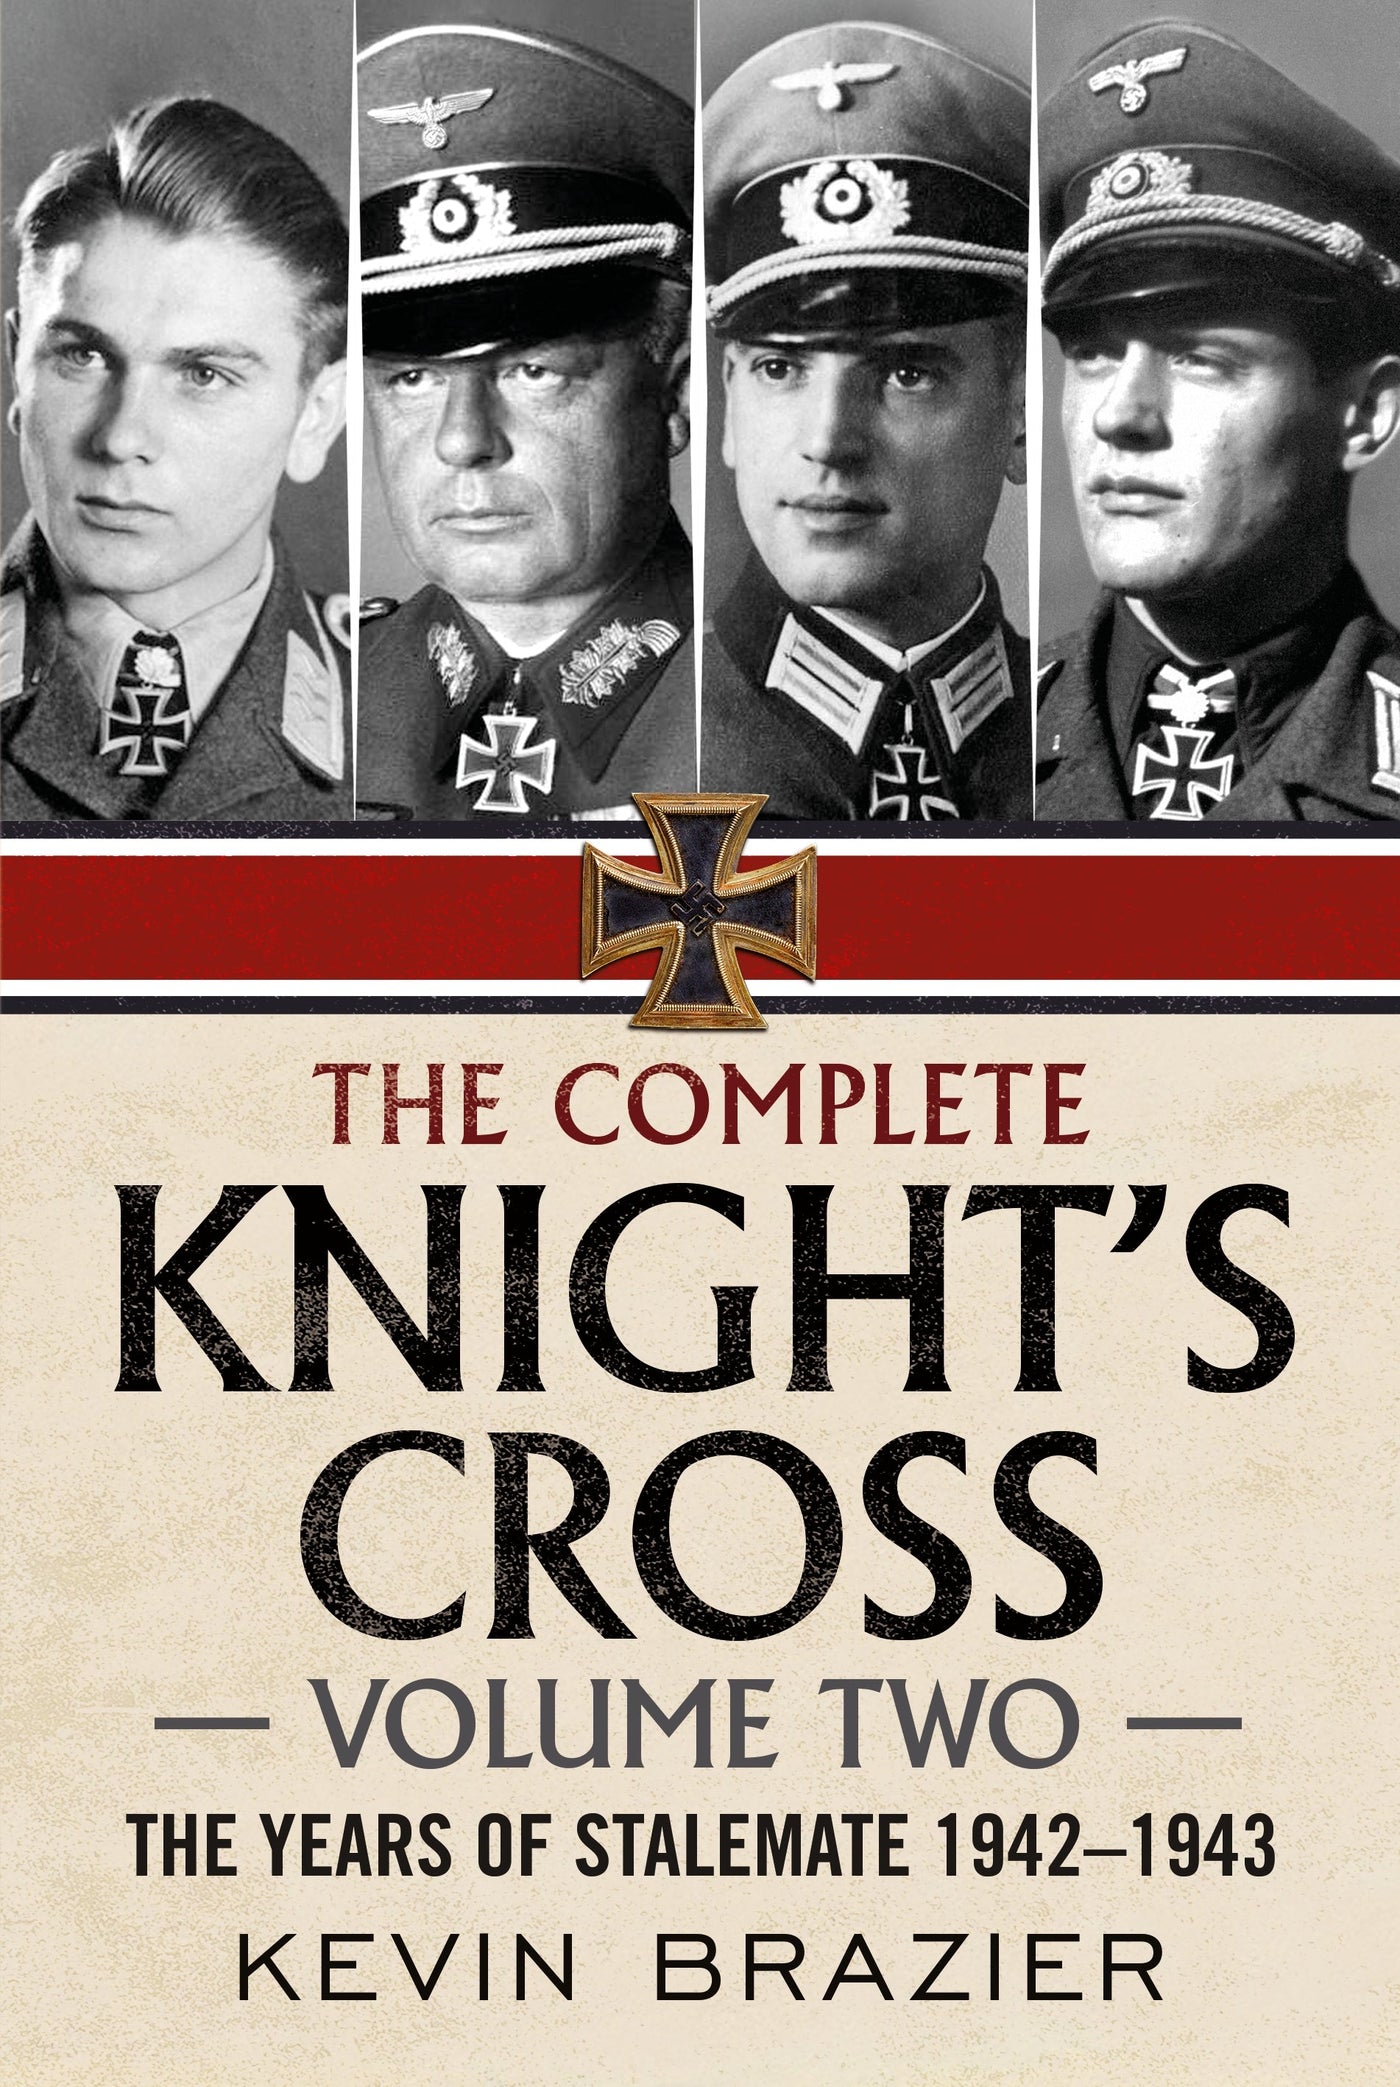 The Complete Knight's Cross: Volume Two